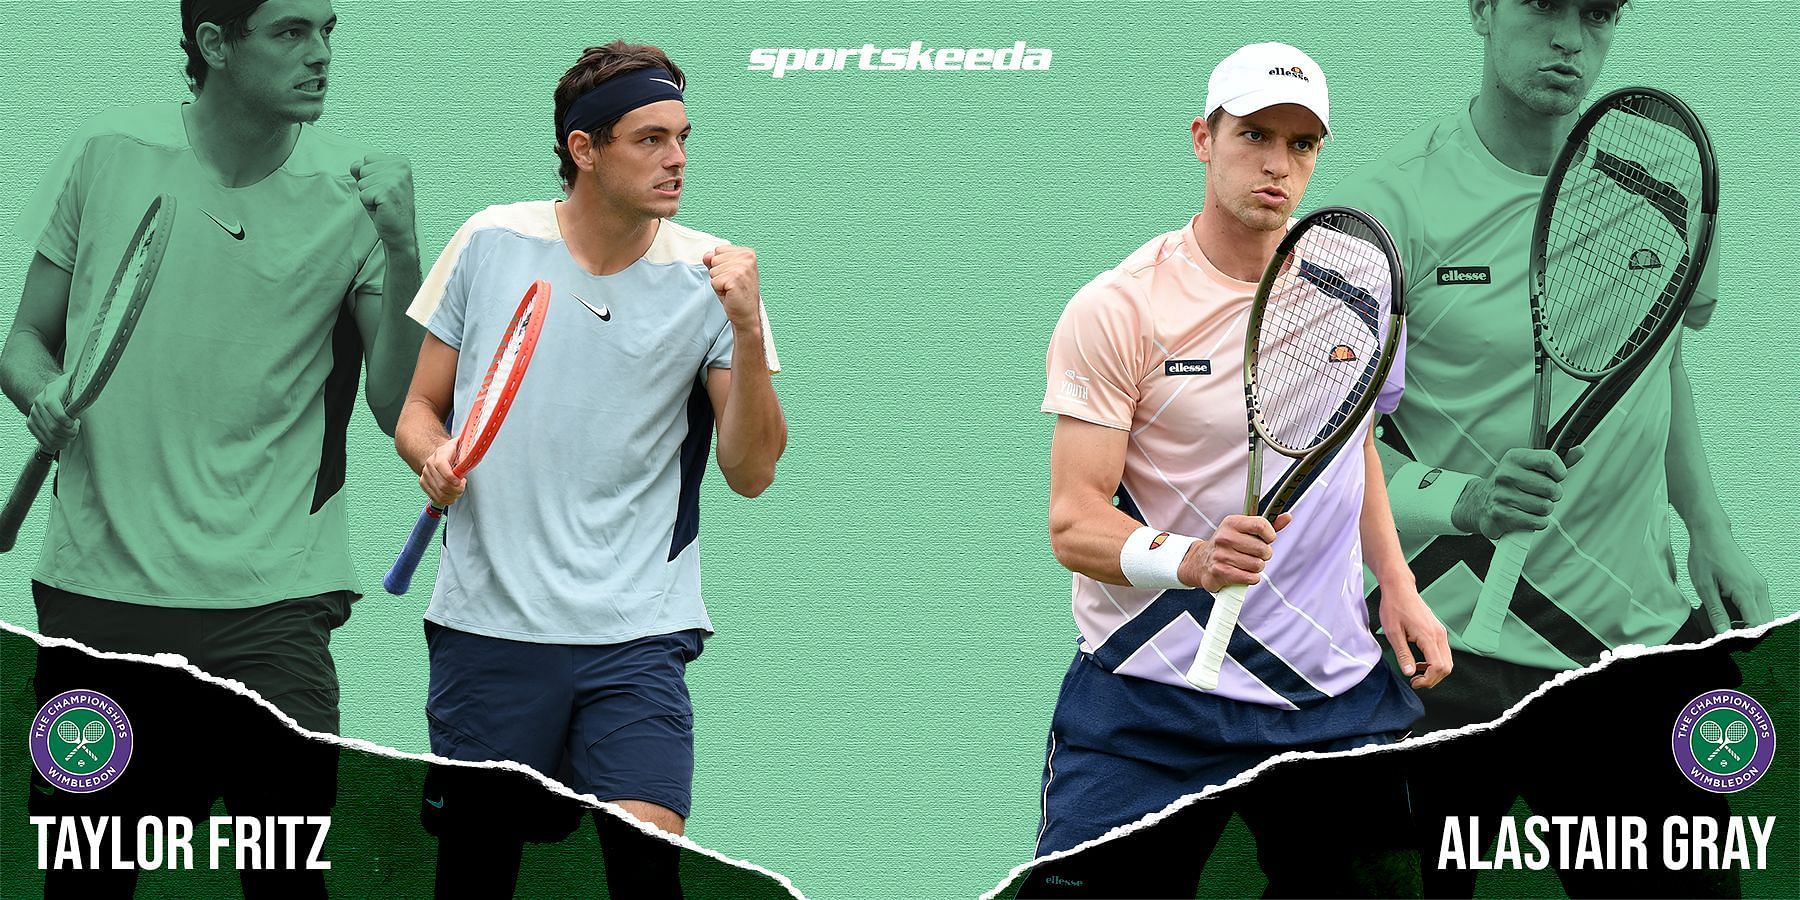 Fritz and Gray will clash in the second round at Wimbledon.